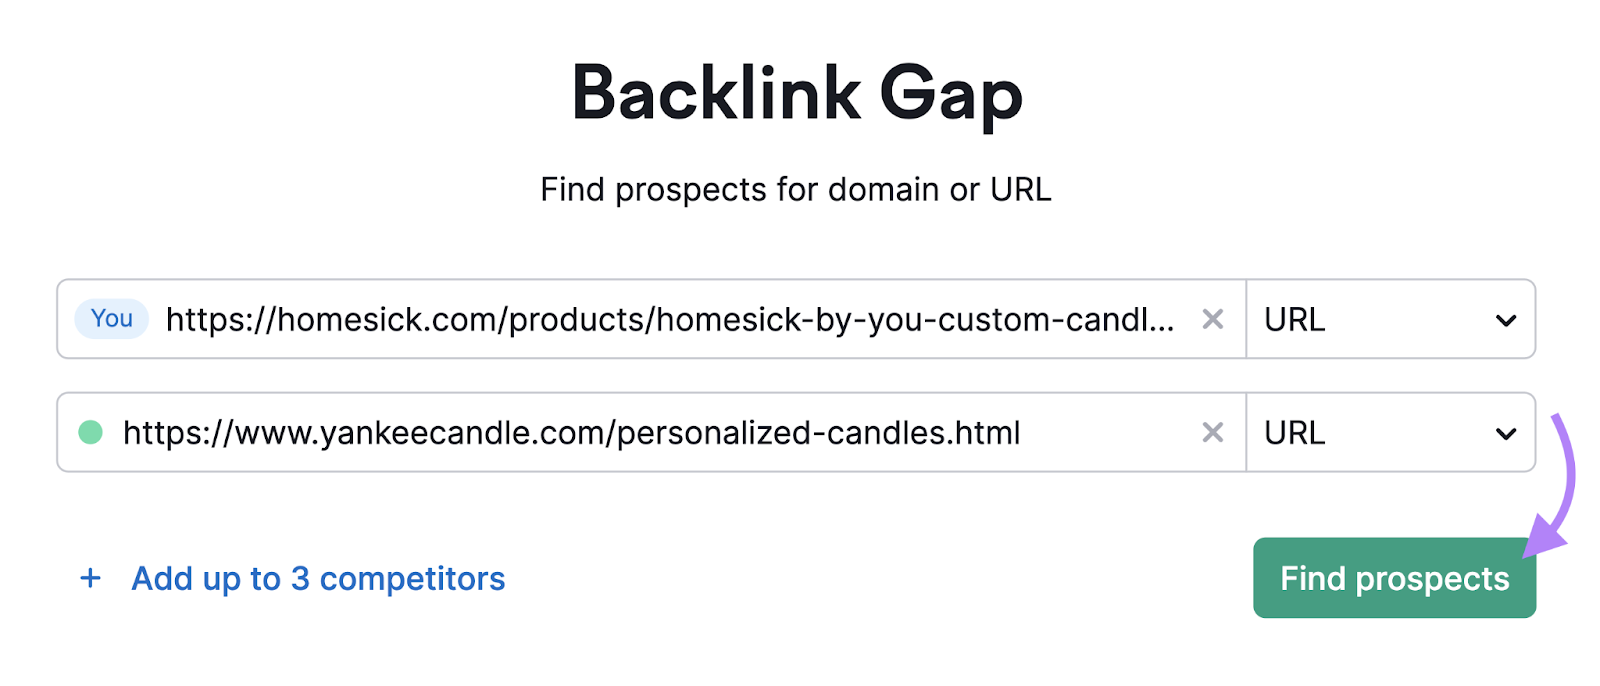 Search bars in the Backlink Gap tool